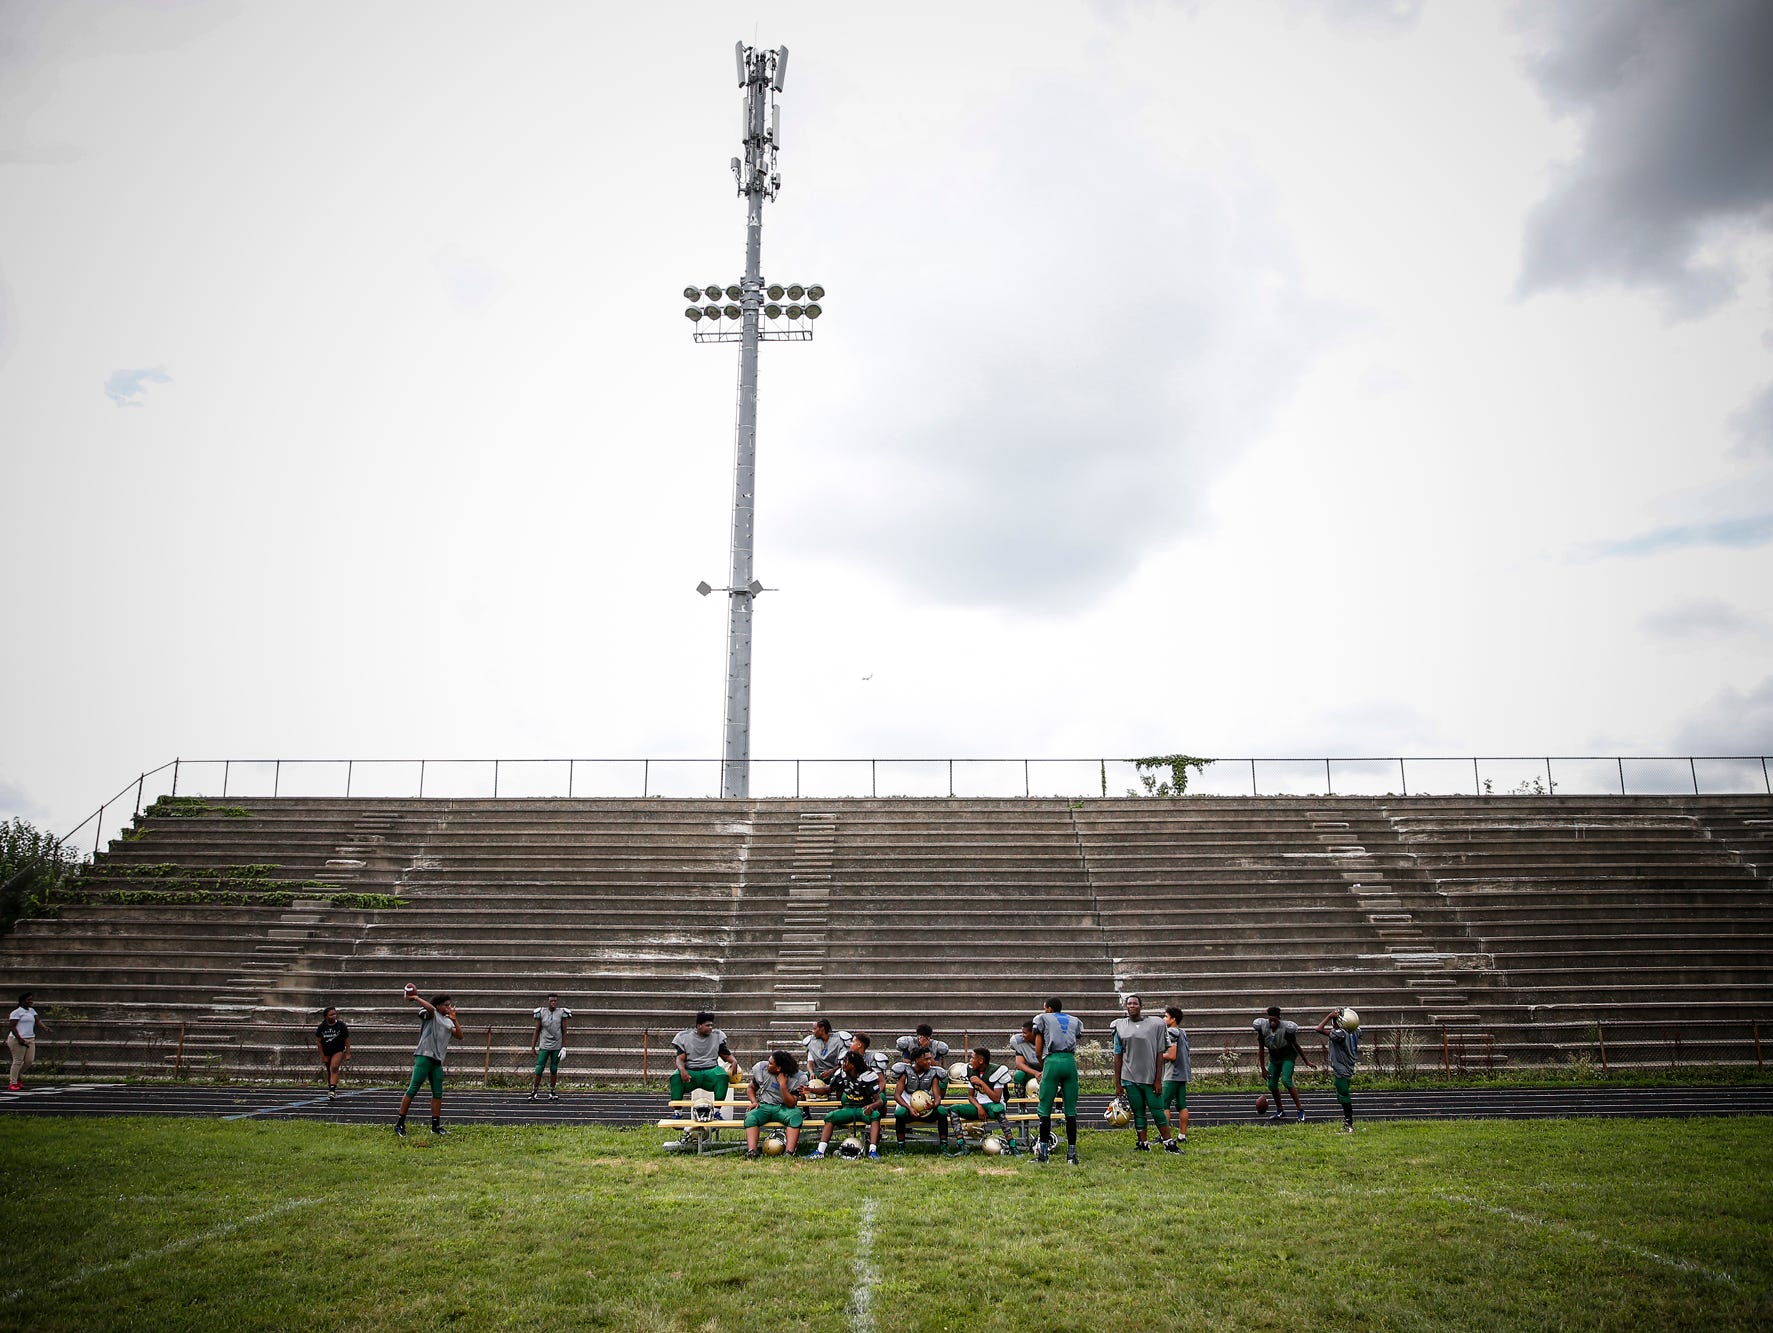 Members of the Crispus Attucks Tigers football team sit on an old set of bleachers to catch a break during practice at Alonzo Watford Athletic Field on Aug. 17, 2016.